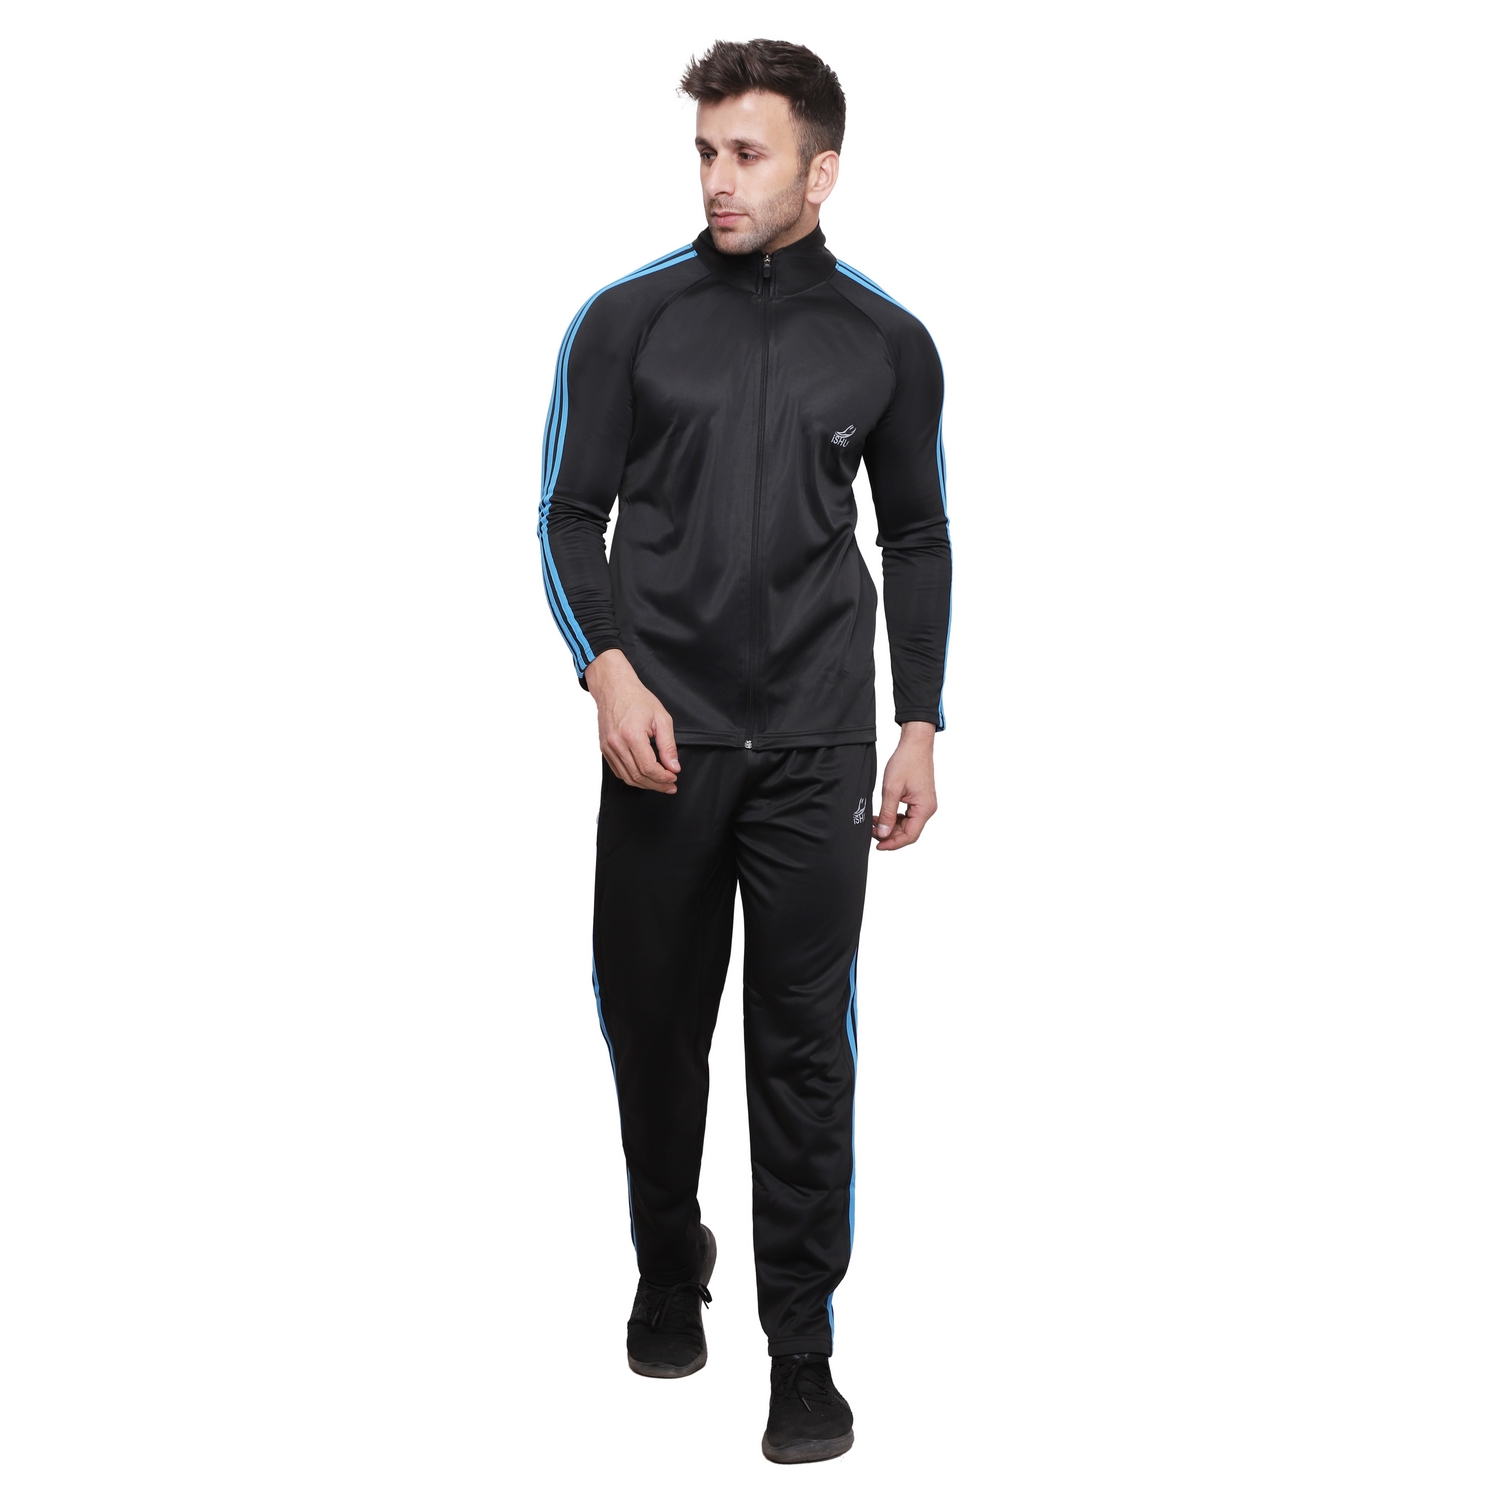 Buy iSHU Black Track Suit Online @ ₹799 from ShopClues